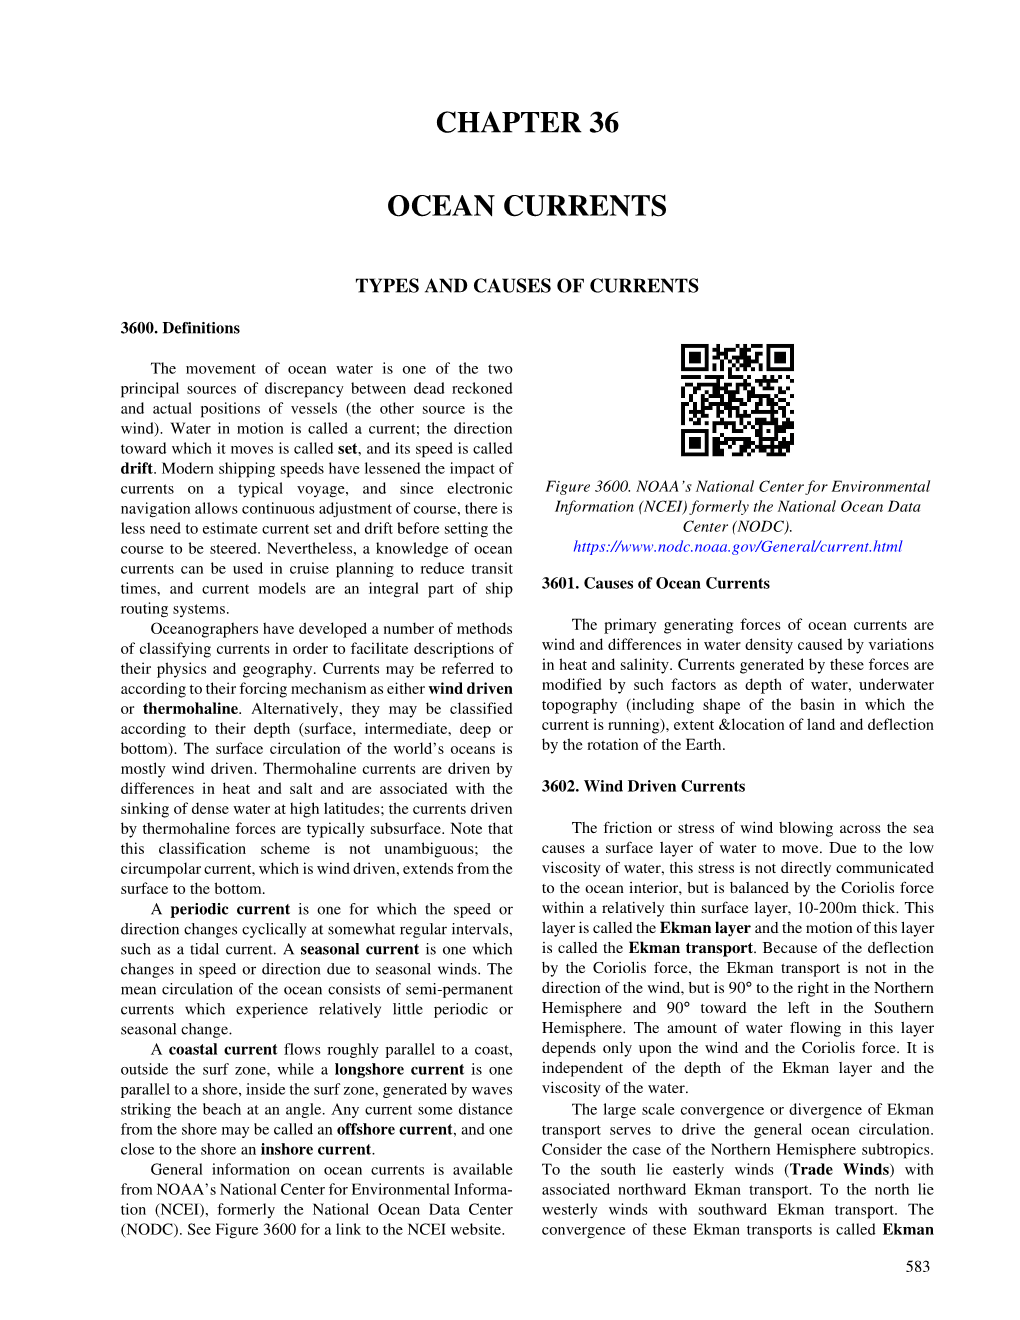 Chapter 36 Ocean Currents